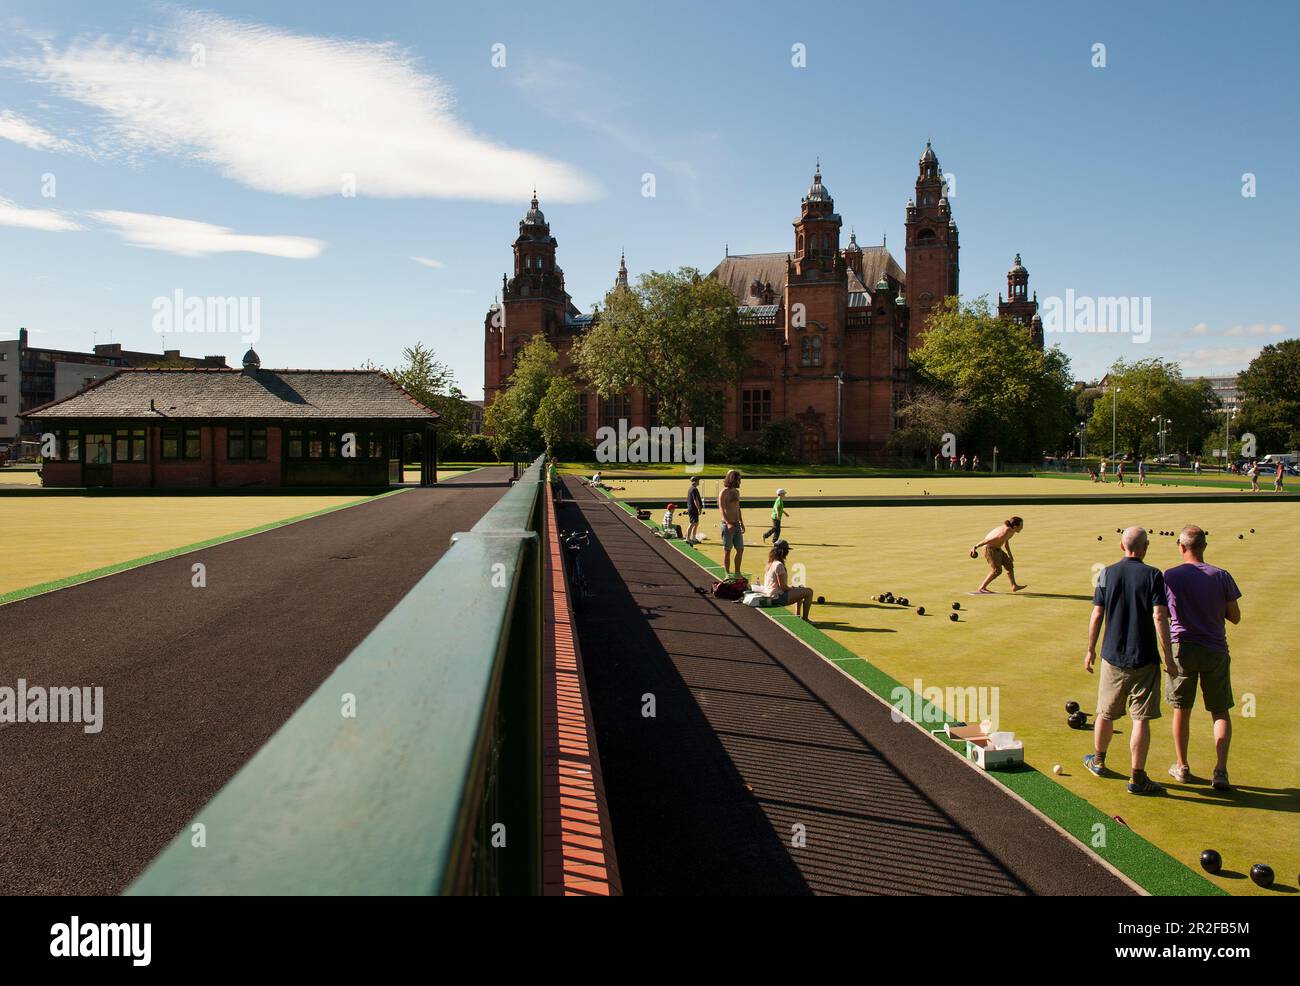 Bowls in play at the Kelvingrove lawn bowling green in front of the Kelvingrove Art Gallery and Museum on a hot day in Glasgow, Scotland, UK Stock Photo